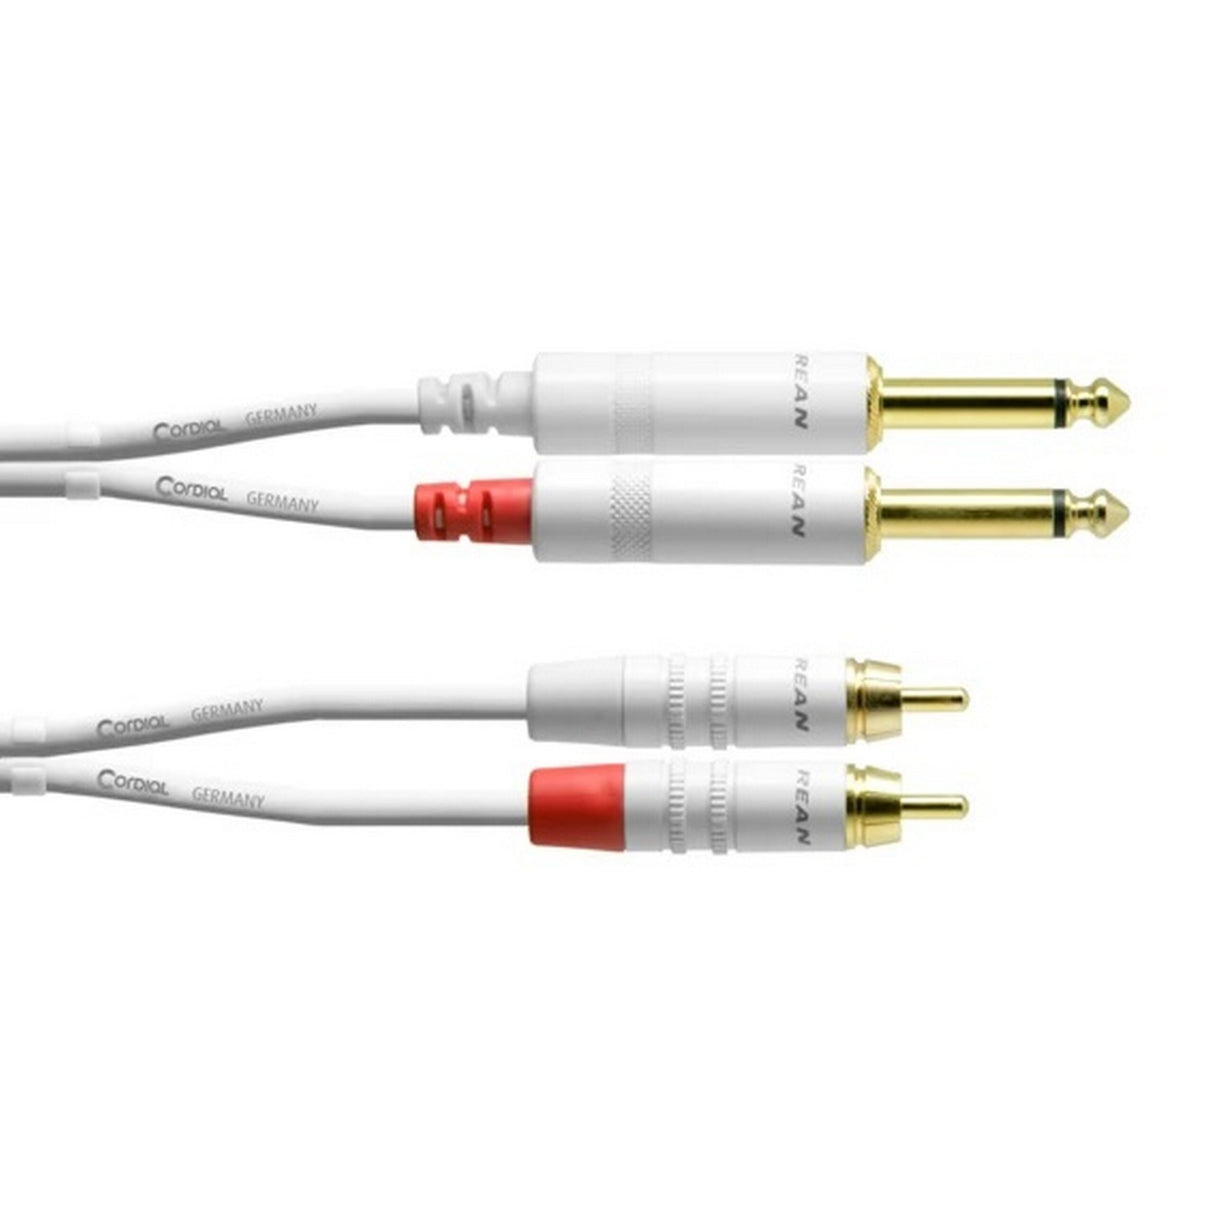 Cordial CFU 3 PC-SNOW 2 x 1/4-Inch to 2 x RCA Twin Cable/Adapter, White, 10-Feet